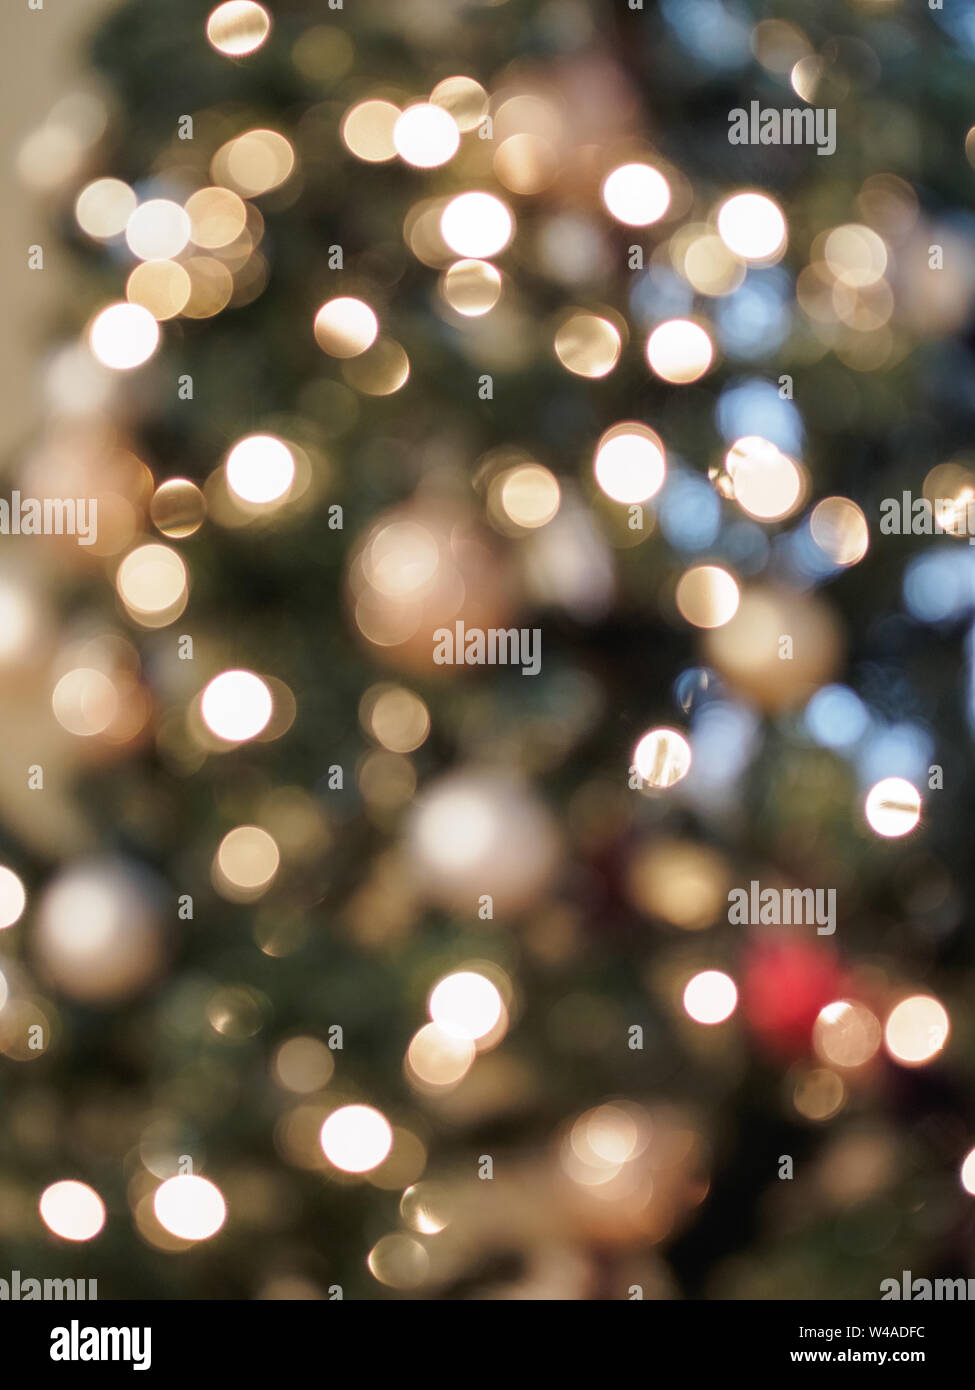 Golden glow of Christmas lights in defocussed with pastel colors showing holiday celebrations and festivities Stock Photo